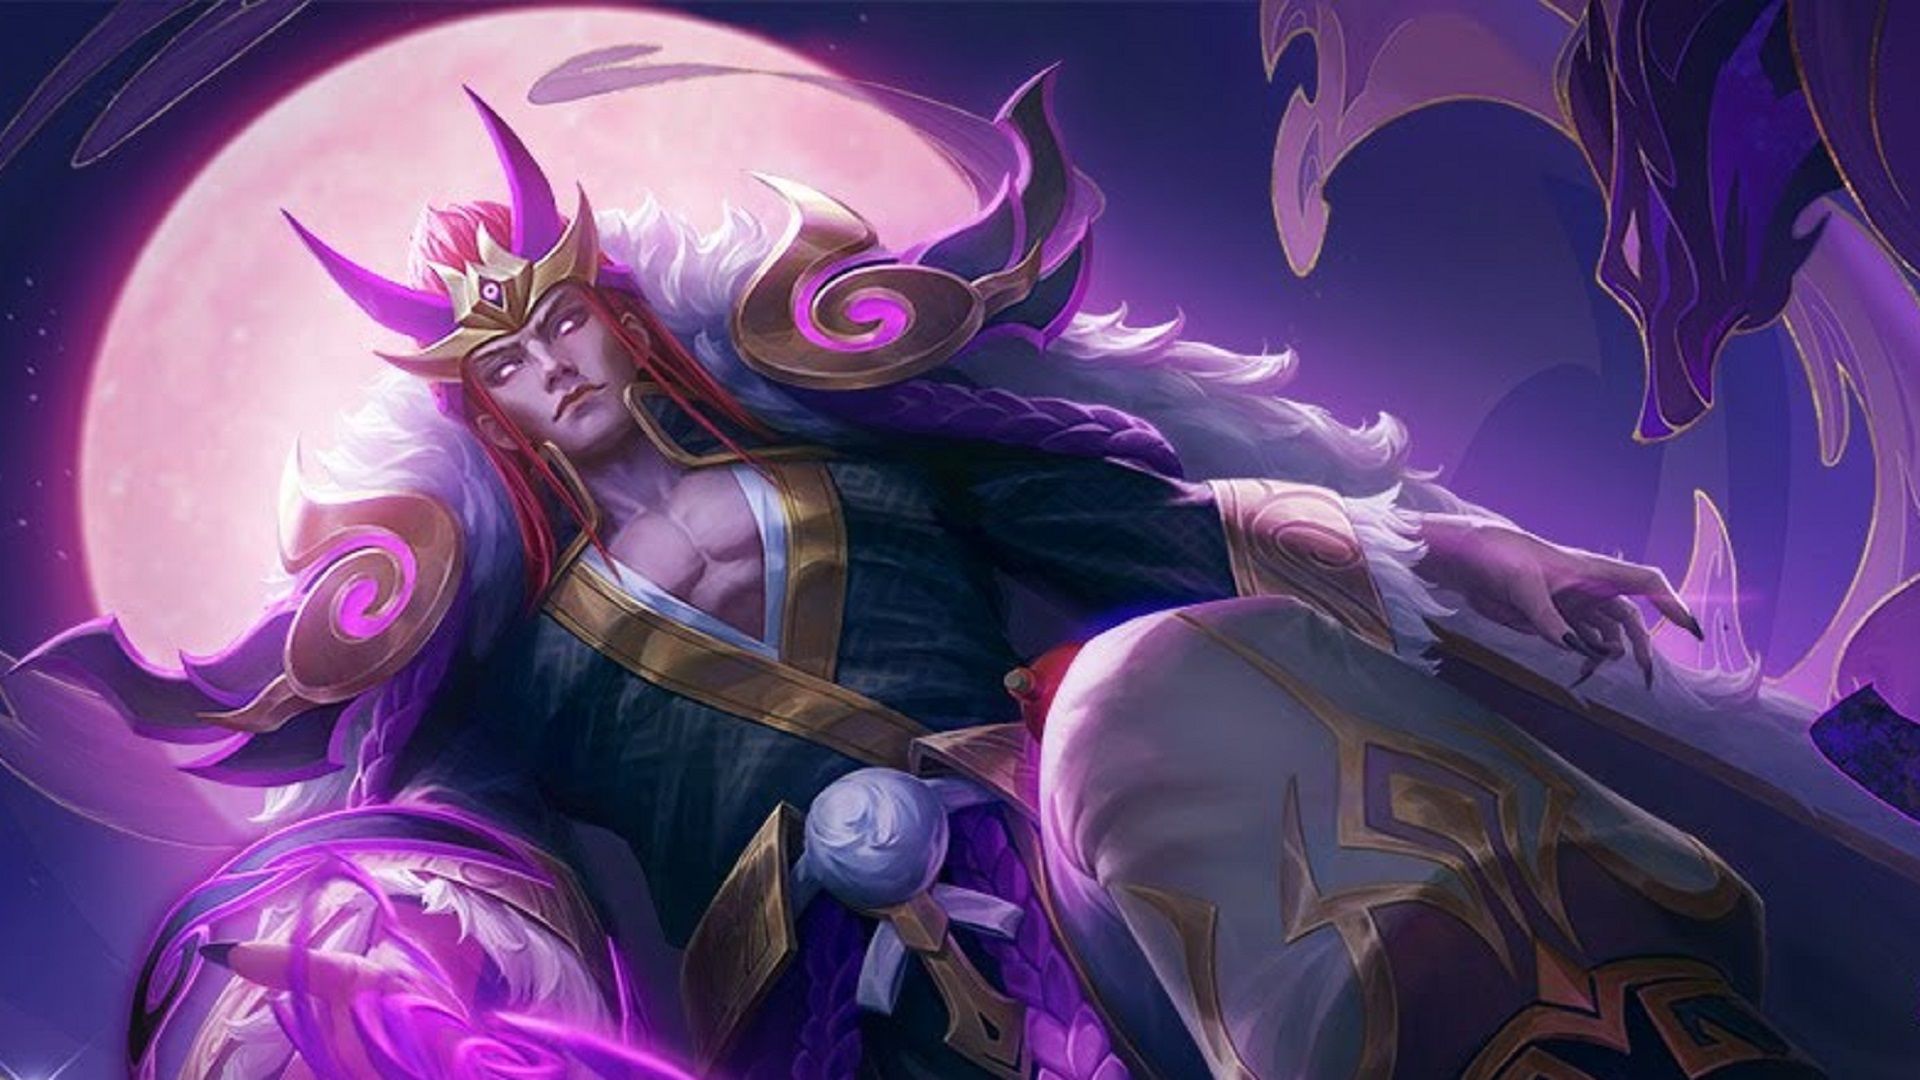 Mobile Legends wallpapers HD download – best mobile and PC wallpapers including Alucard, Layla, Miya, and more